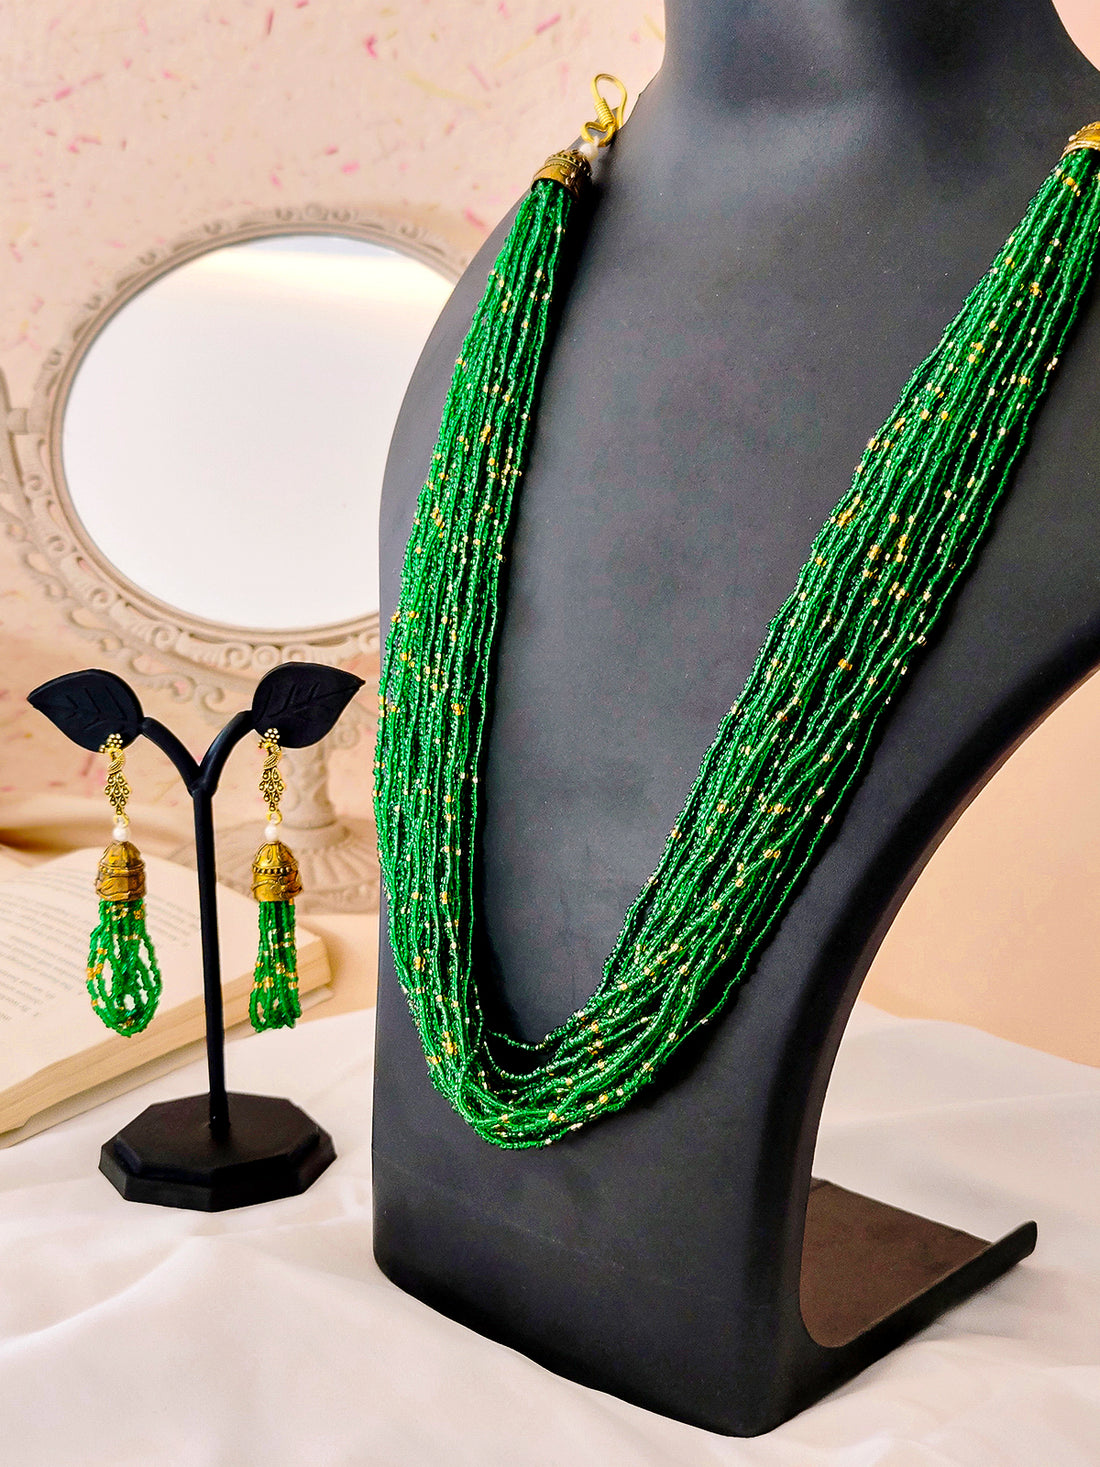 Moti Jhalar Necklace Set | Green-colour Beads Necklace & Earrings for Parties & Office Going Women from House of Mrigaya by Nandini – Green - Mrigaya India